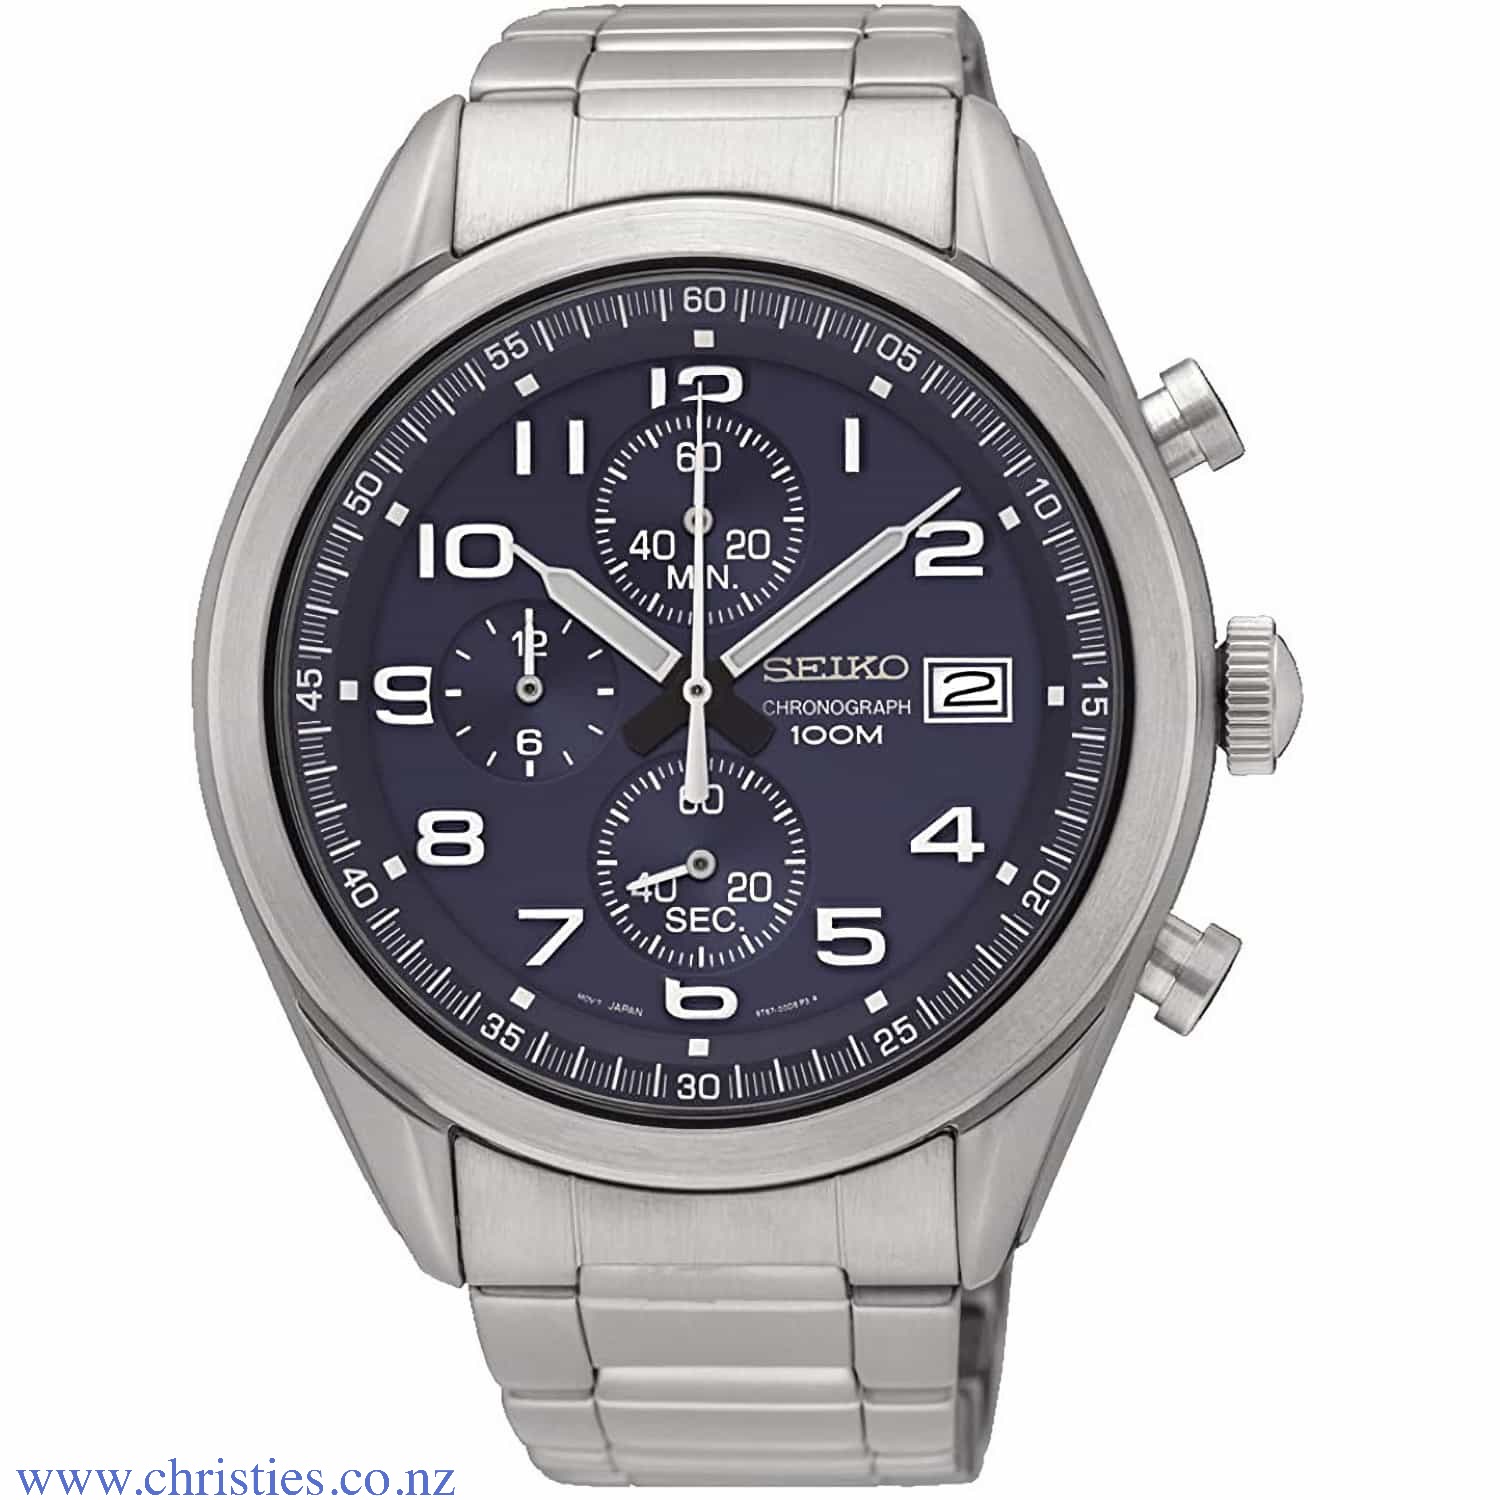 SSB267P Seiko Sports Chronograph Watch. Using the Seiko Quartz 8T67 movement, the Seiko chronograph SSB267P1 features in full stainless steel with Hardlex glass and a case size of 44.9mm and thickness of 12.1mm. This watch has a water resistance rating of